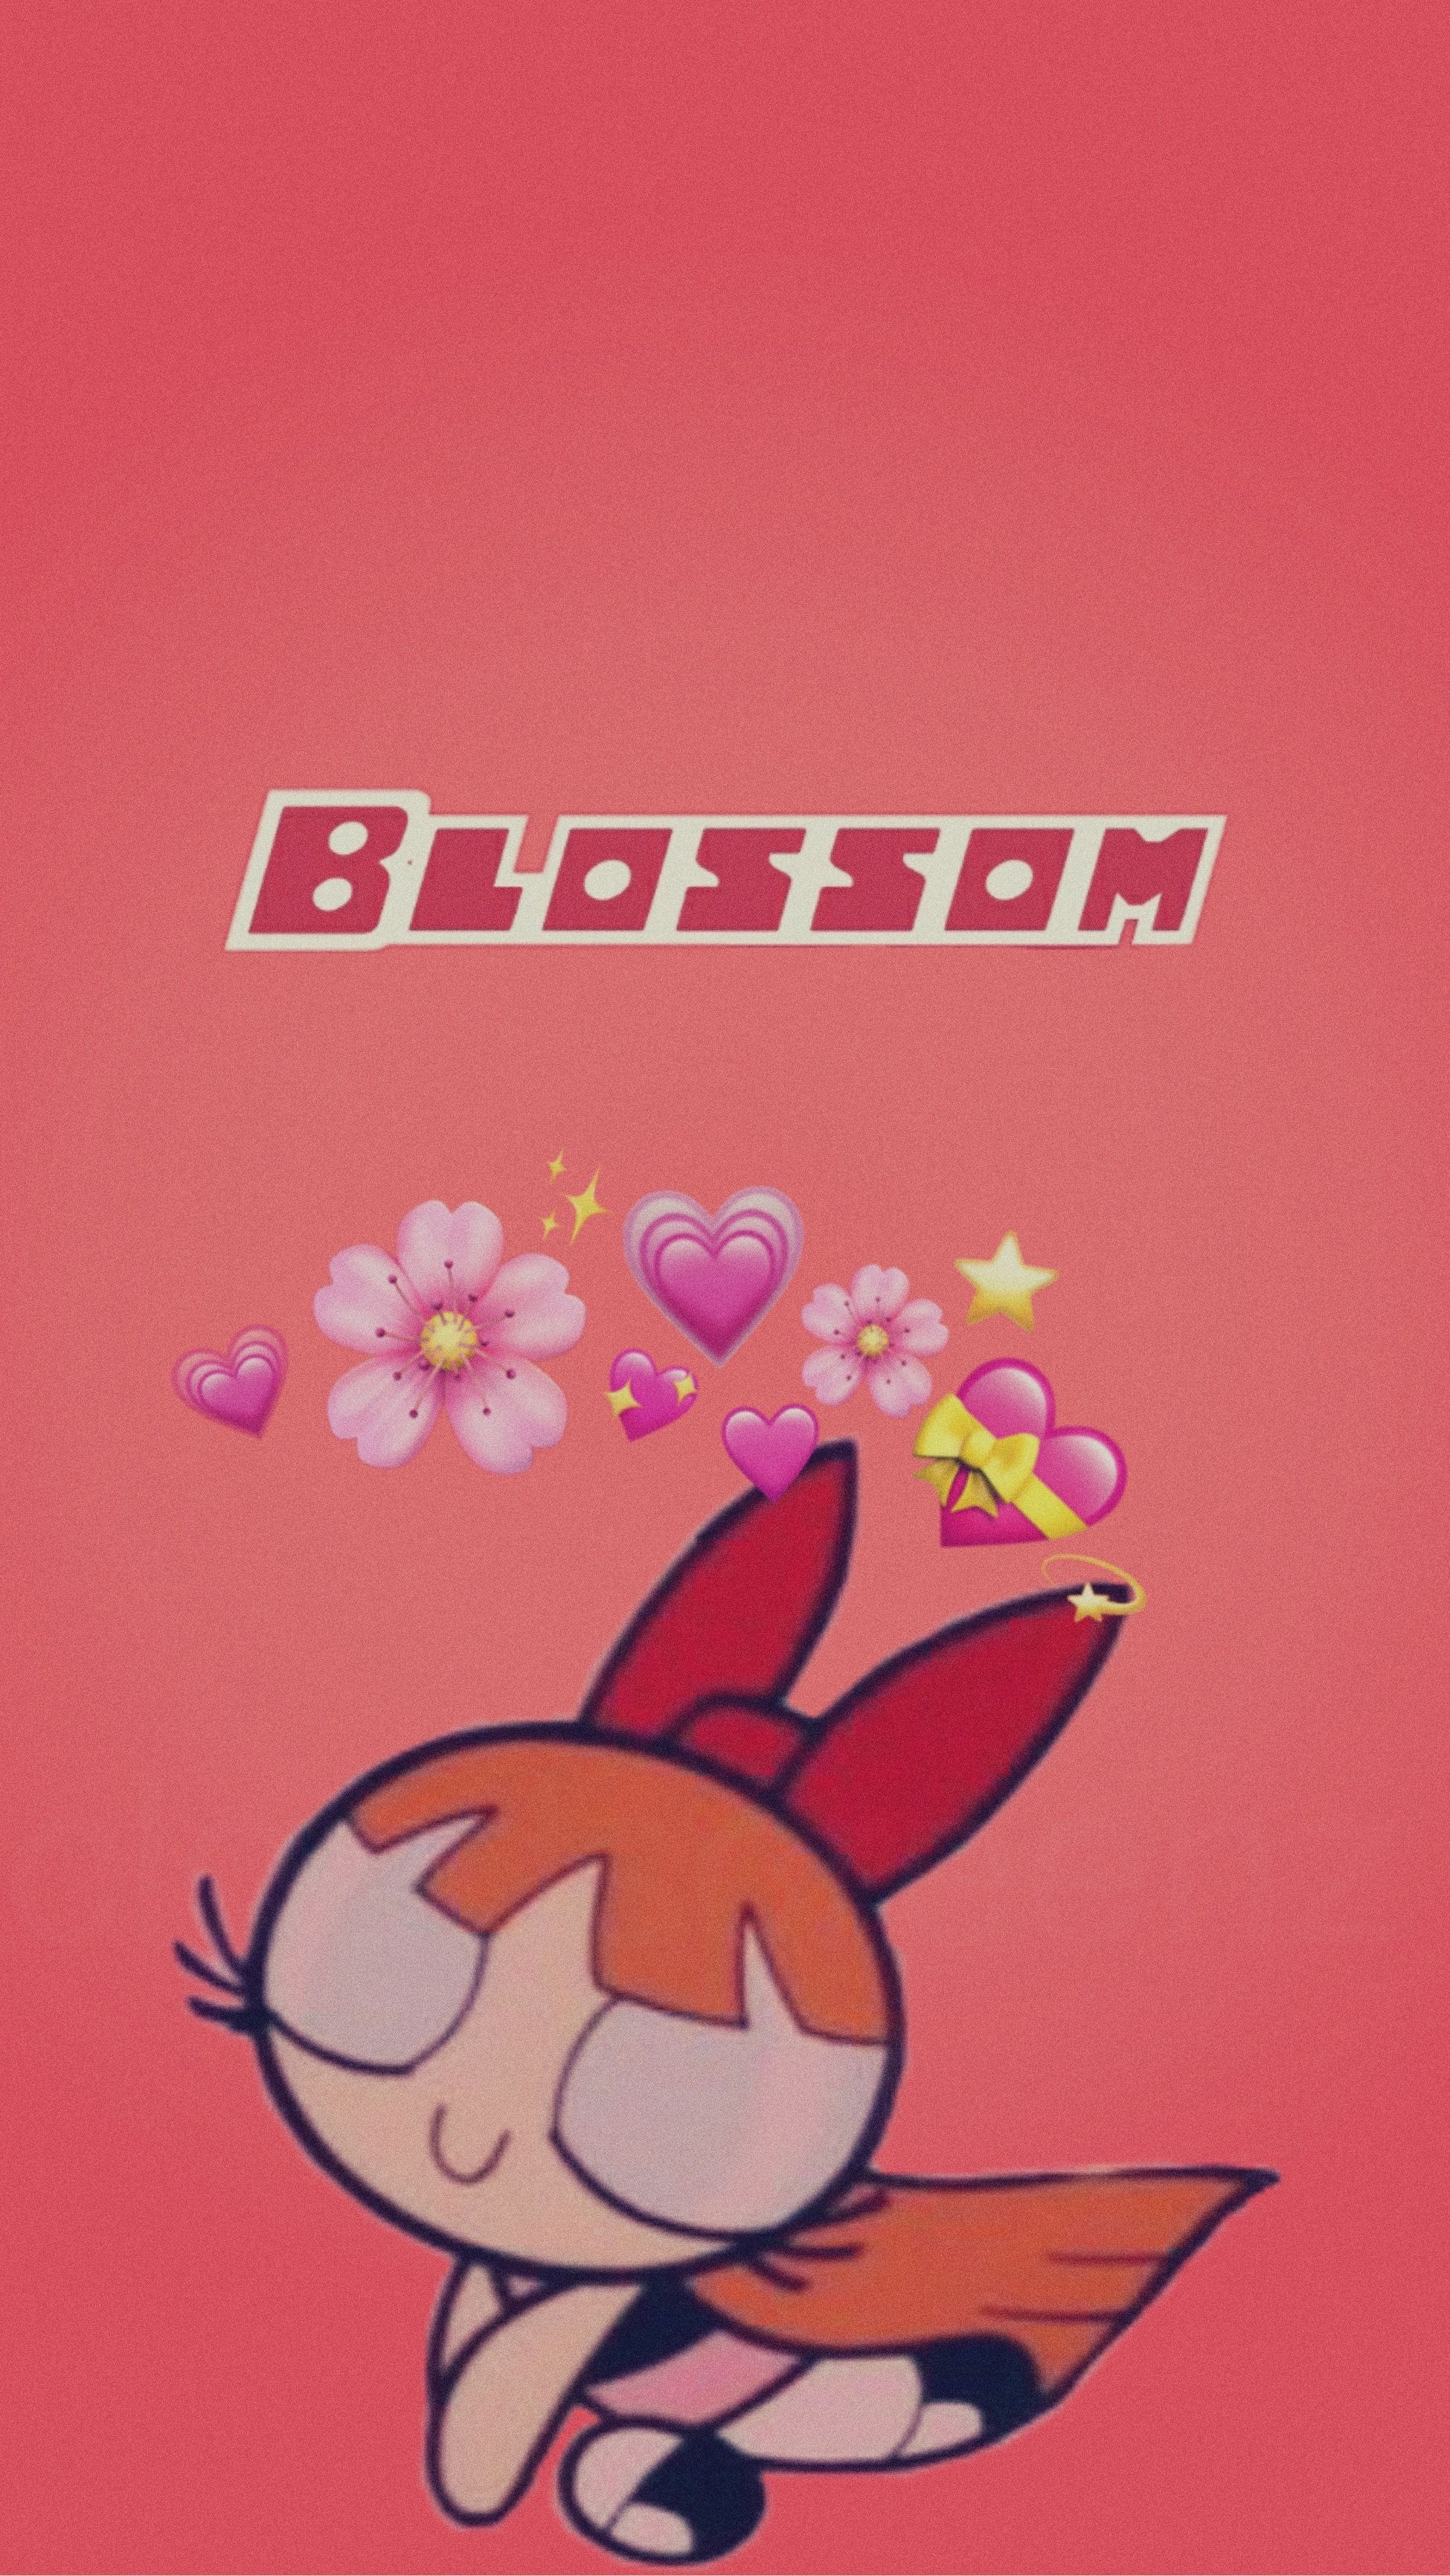 blossom Image by